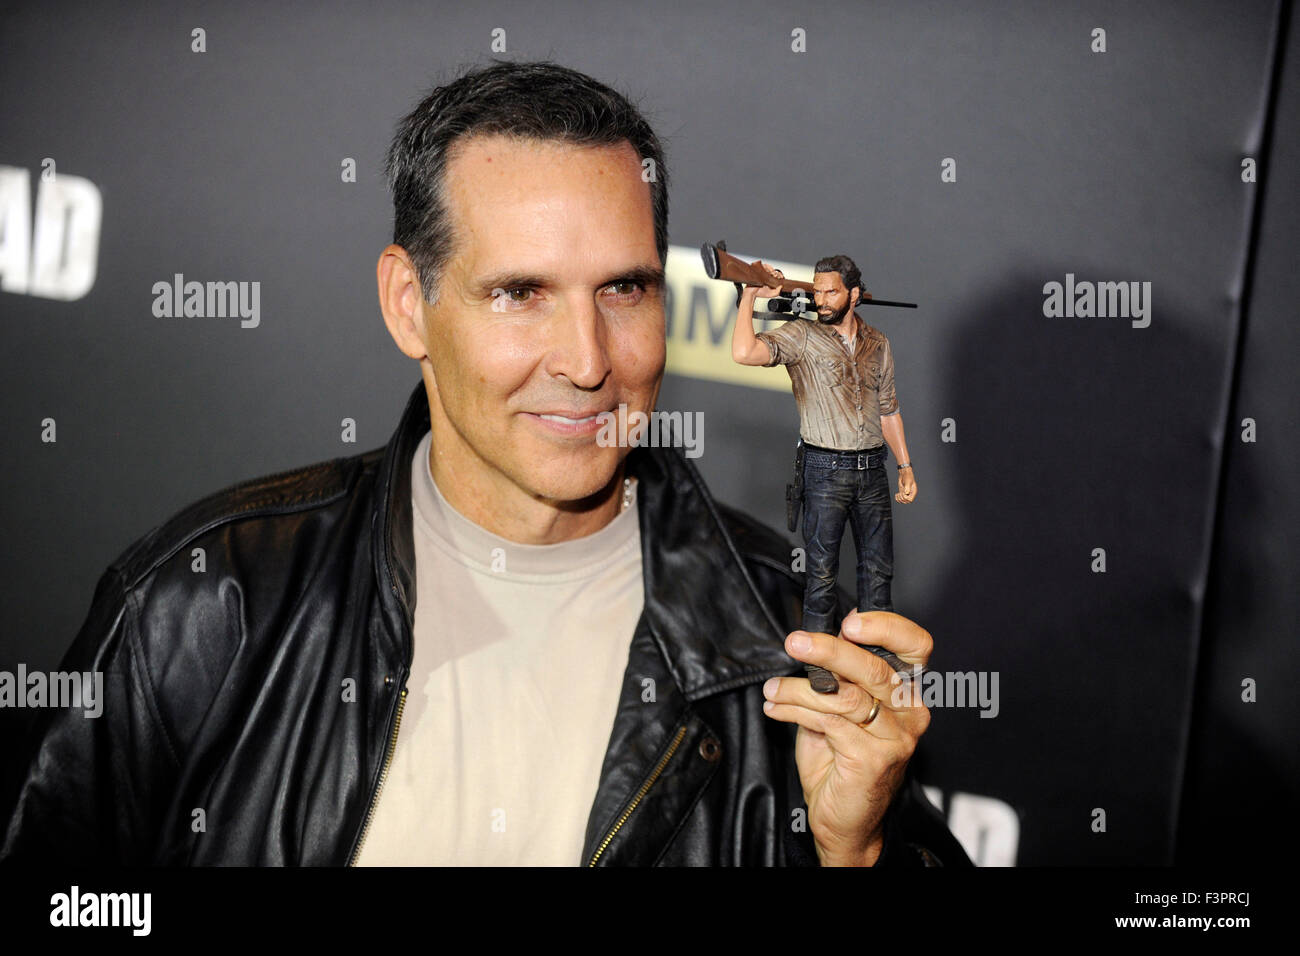 New York City. 9th Oct, 2015. Cartoonist Todd McFarlane attends AMC's 'The Walking Dead' Season 6 Fan Premiere Event 2015 at Madison Square Garden on October 9, 2015 in New York City. © dpa/Alamy Live News Stock Photo